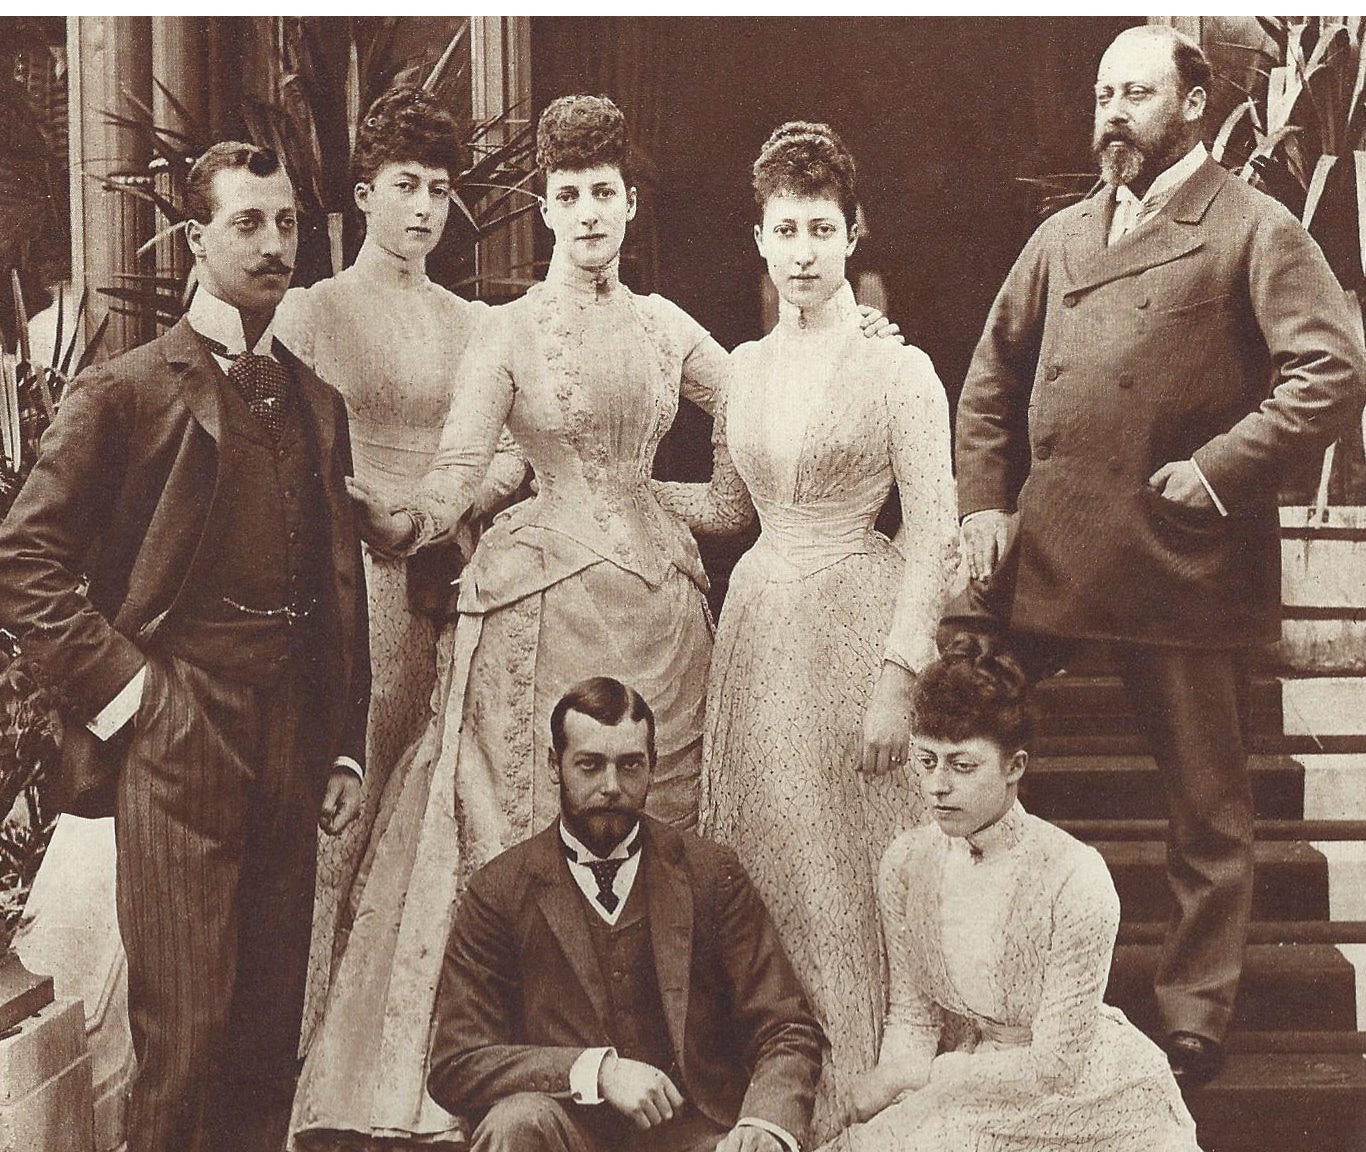 https://intriguing-history.com/wp-content/uploads/2015/02/edward-VII-and-family-Queen-Alexandria-daughters-and-future-George-V-and-the-later-Duke-of-Clarence-who-died-from-Influenza-1892.jpg